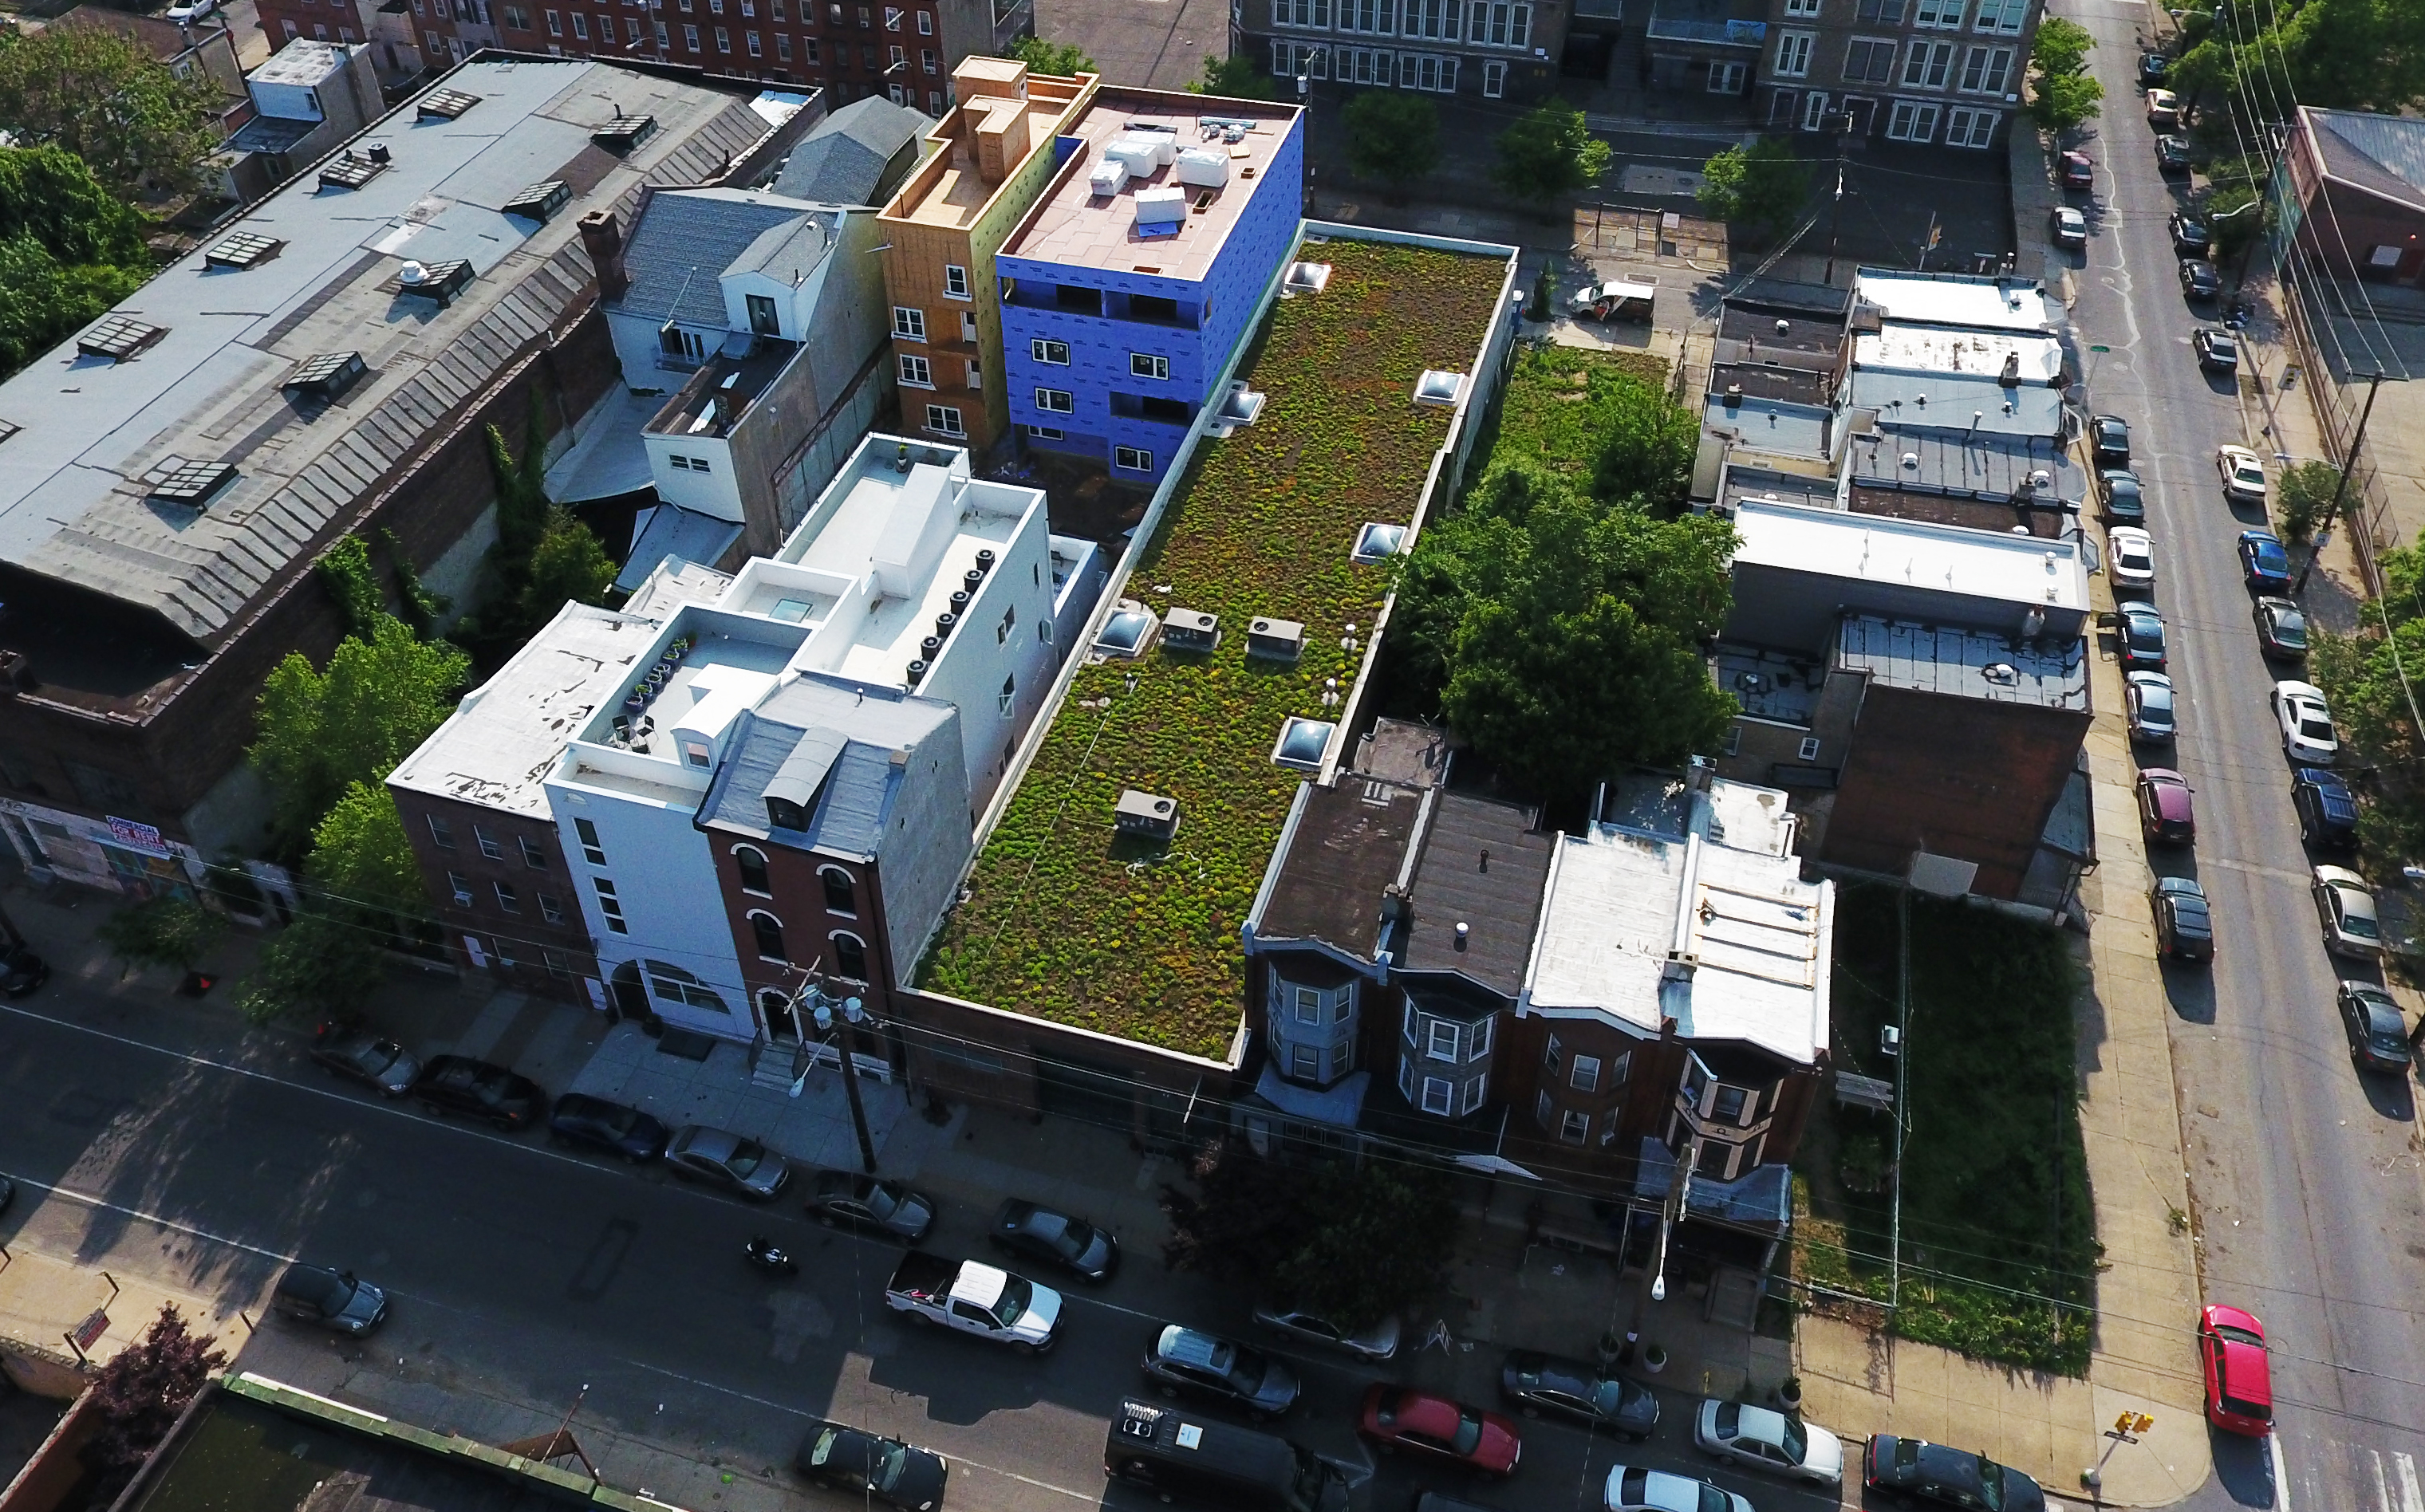 Drone footage of the 7600 SF green roof on 5th street in Kensington